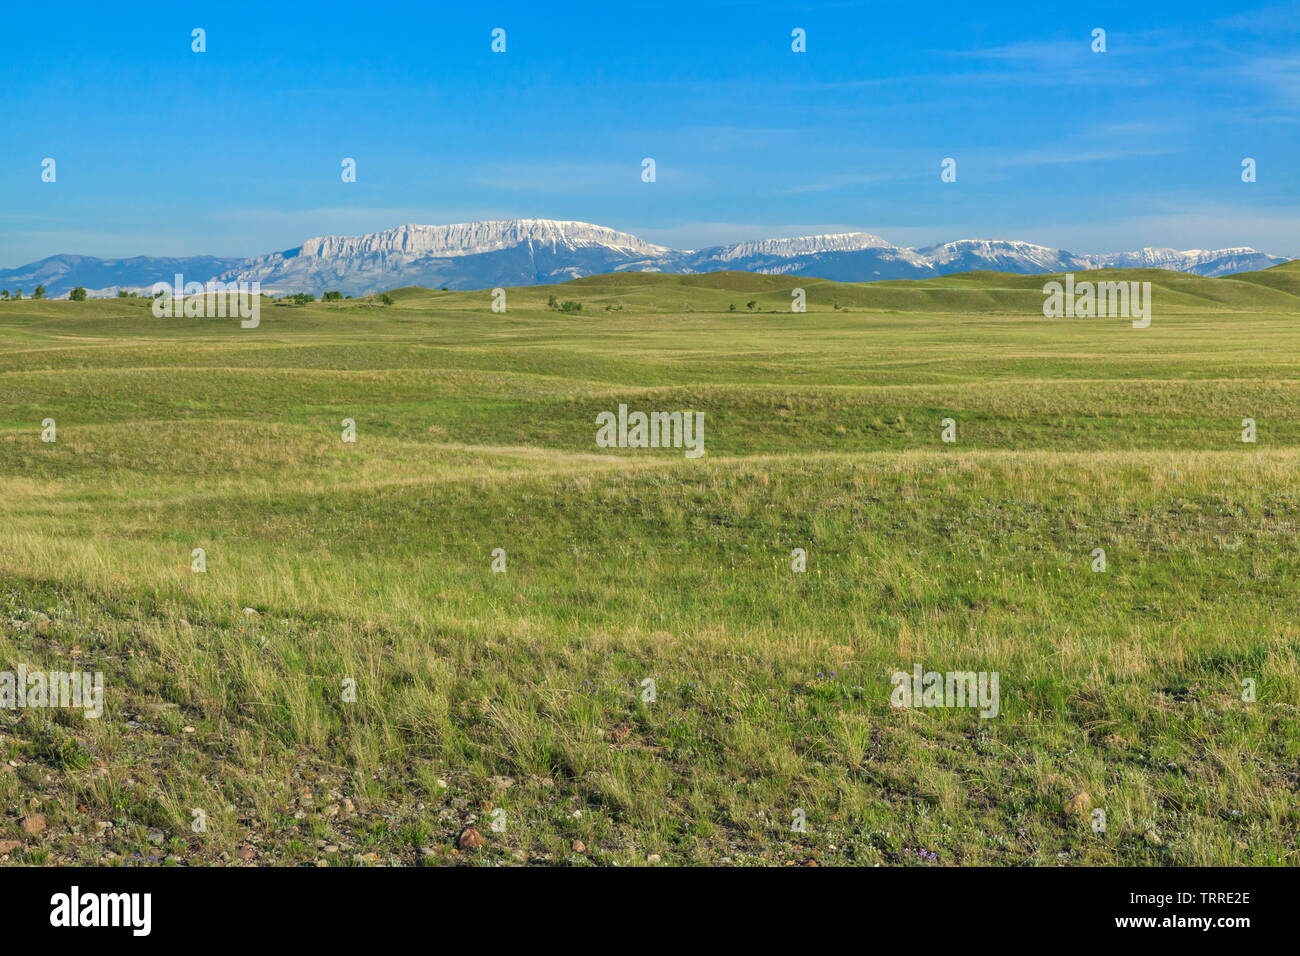 castle reef along the rocky mountain front above the vast prairie near augusta, montana Stock Photo